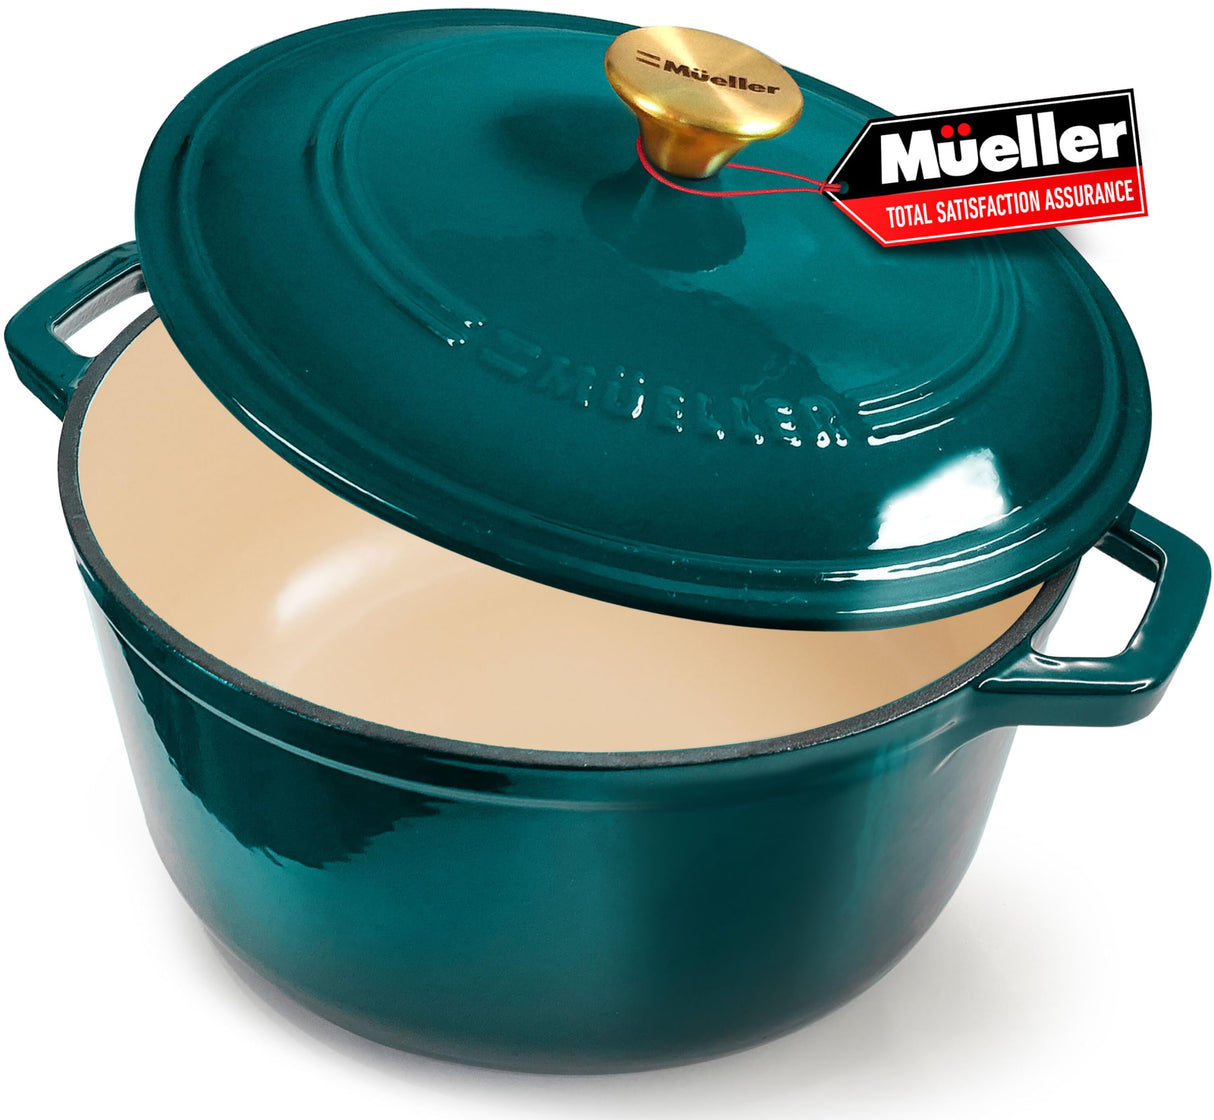 Mueller DuraCast 6 Quart Enameled Cast Iron Dutch Oven Pot with Lid, Heavy-Duty, Oven Safe up to 500° F & Across All Cooktops, Wedding Registry Ideas & Gifts, Emerald